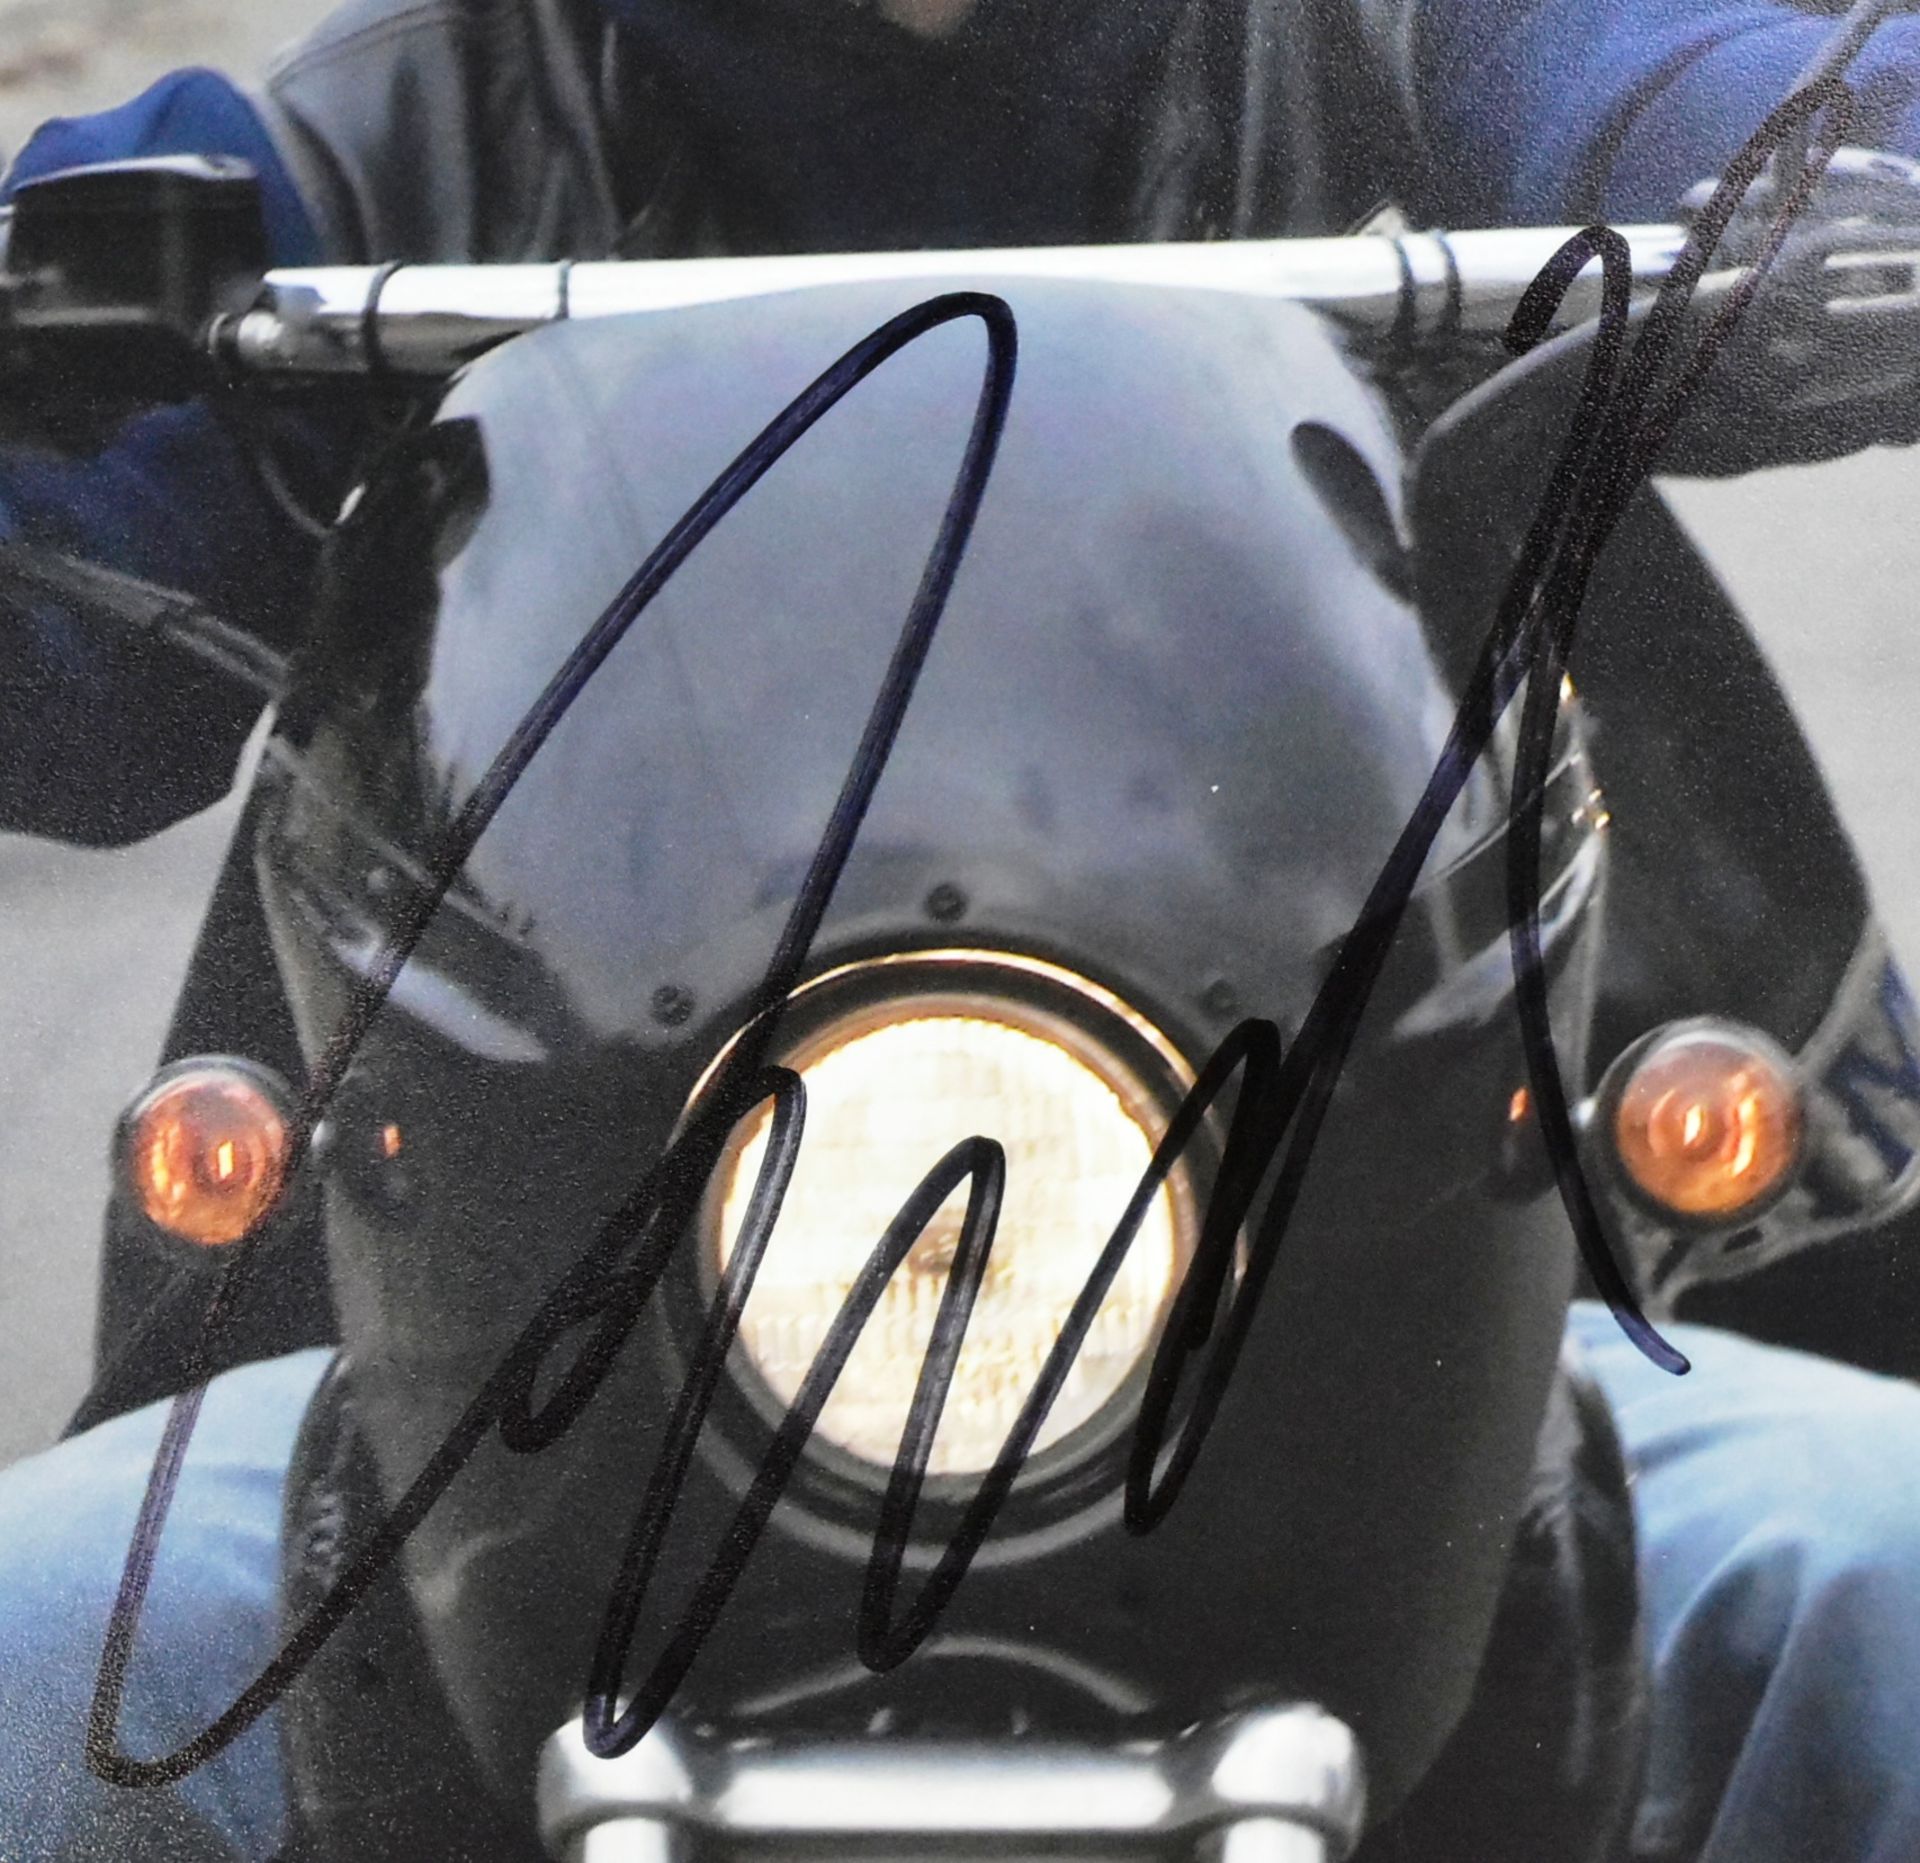 CHARLIE HUNNAM - SONS OF ANARCHY - SIGNED 8X10" - ACOA - Image 2 of 2